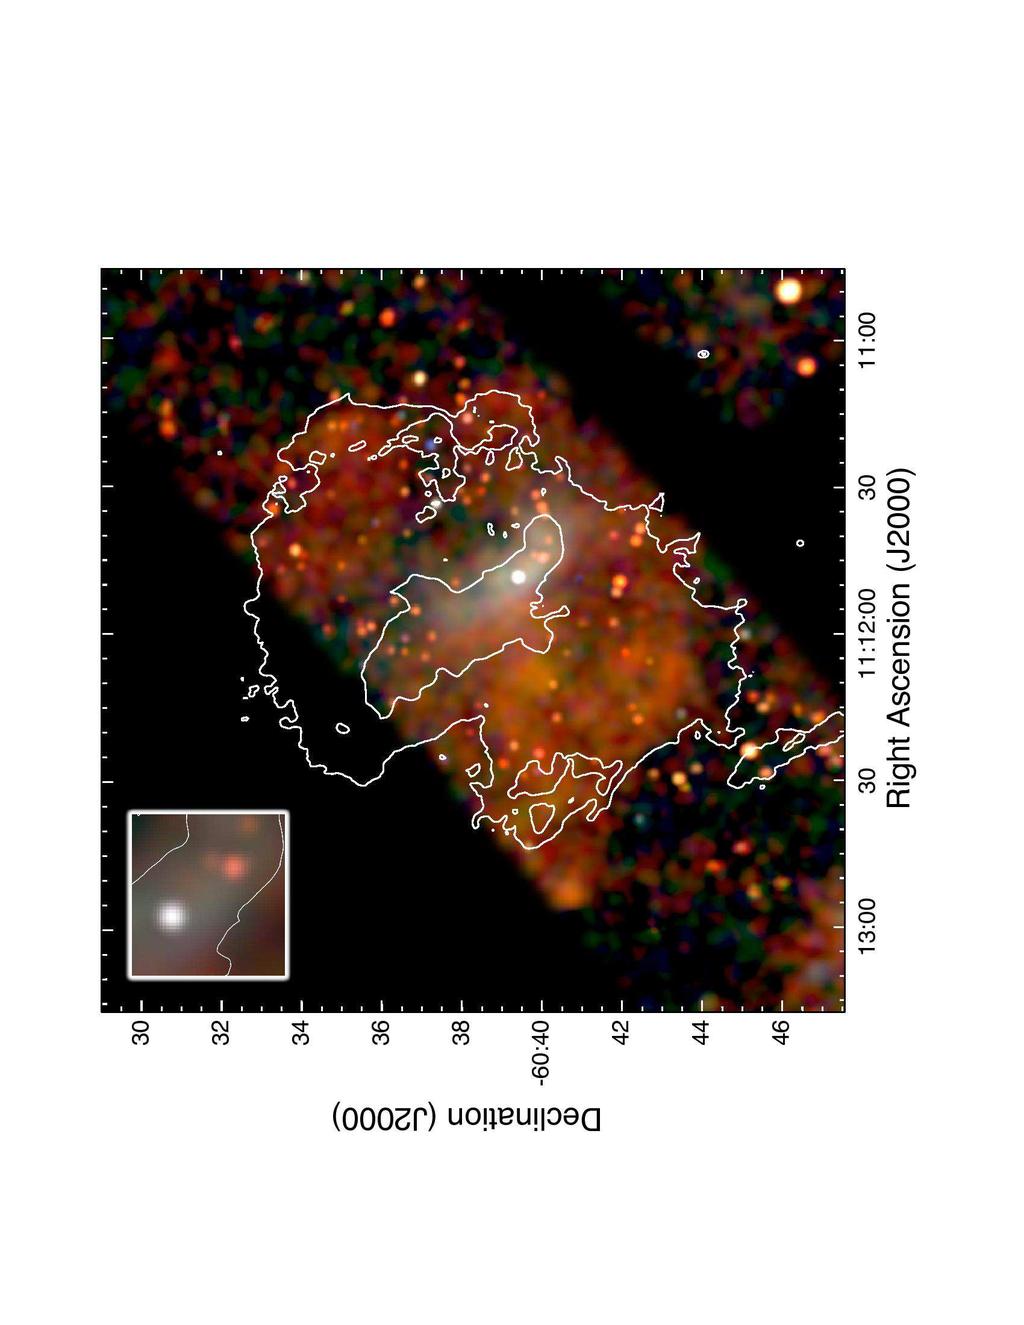 2 Slane et al. Fig. 1. ATCA 1.4 GHz image of MSH 11 62. The remnant is characterized by a faint shell with a bright central bar. Contours levels are 3.6 and 1.5 mjy beam 1.